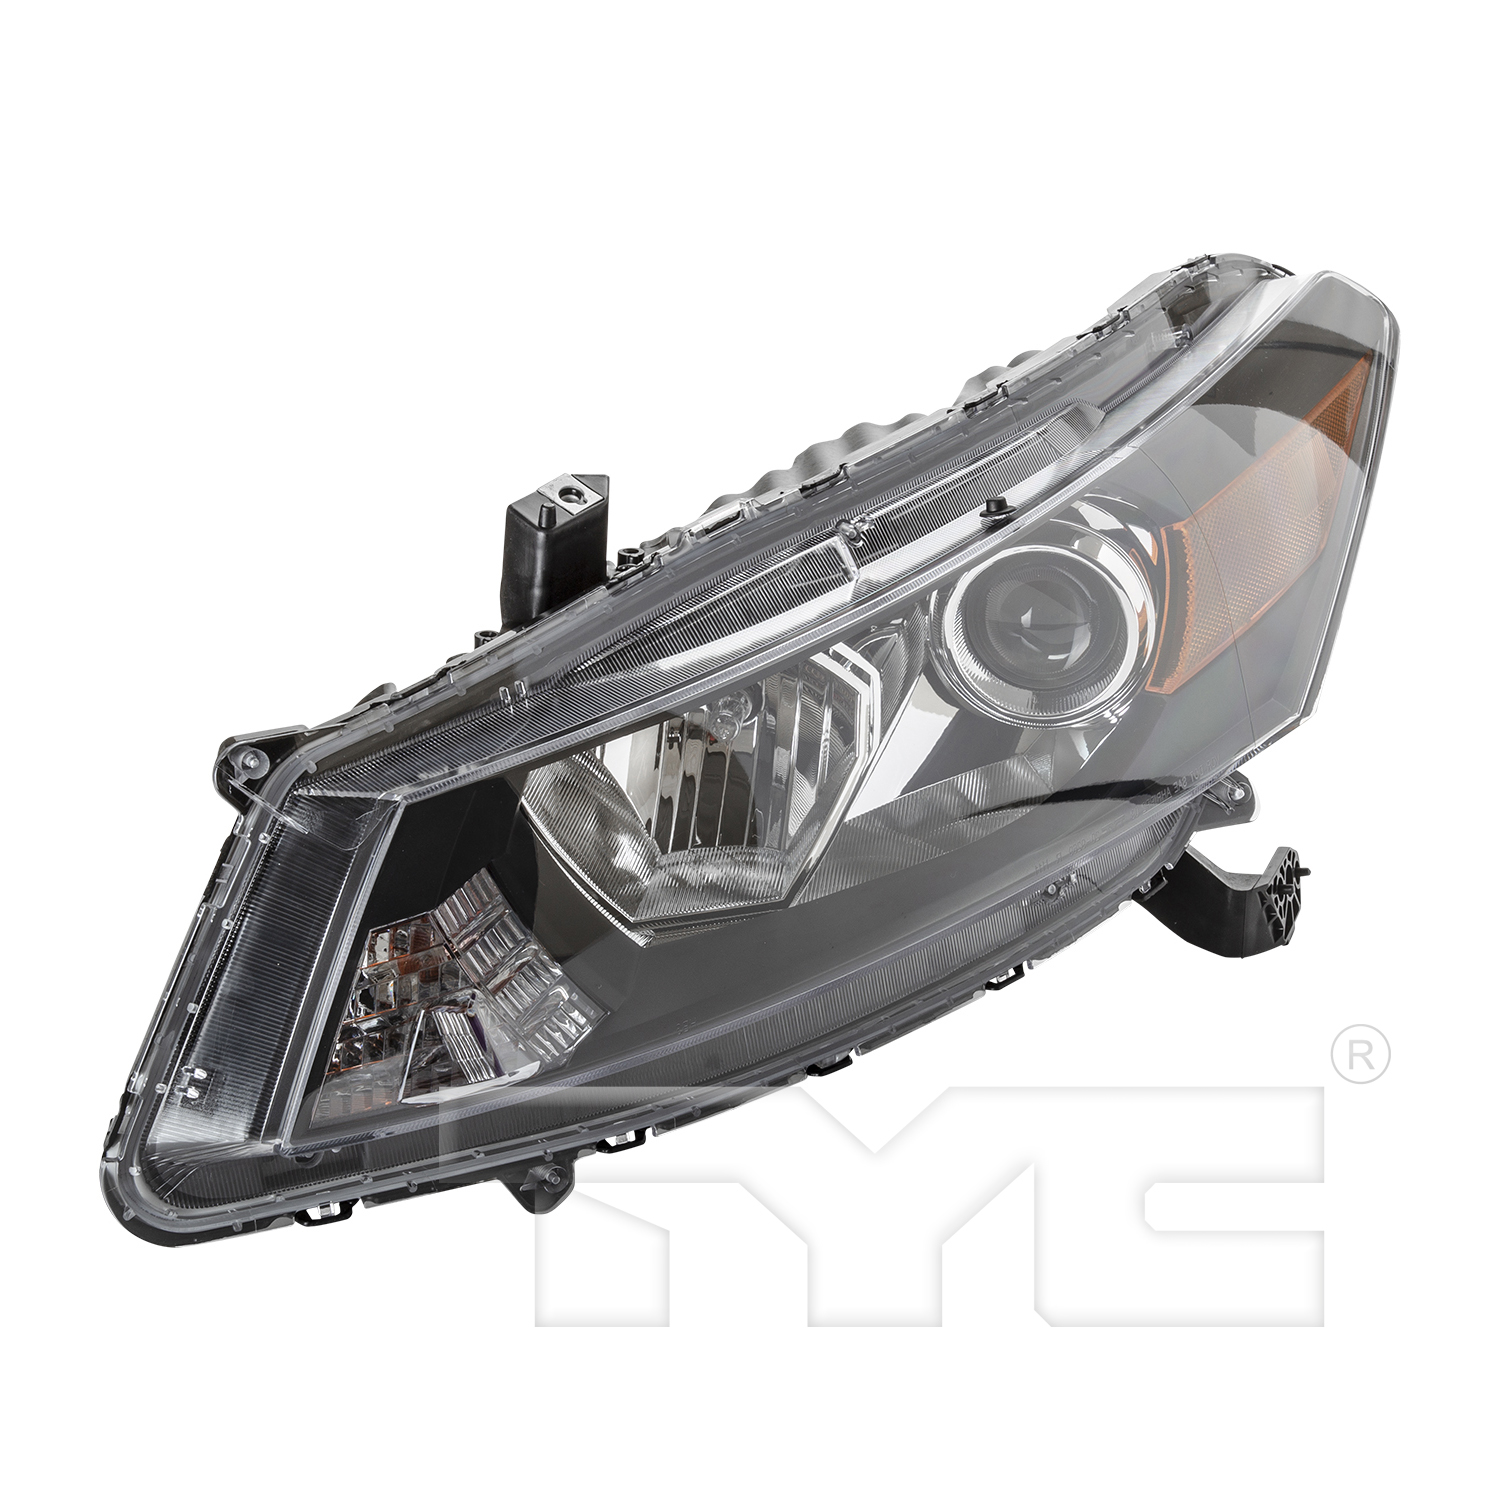 Aftermarket HEADLIGHTS for HONDA - ACCORD, ACCORD,11-12,LT Headlamp assy composite